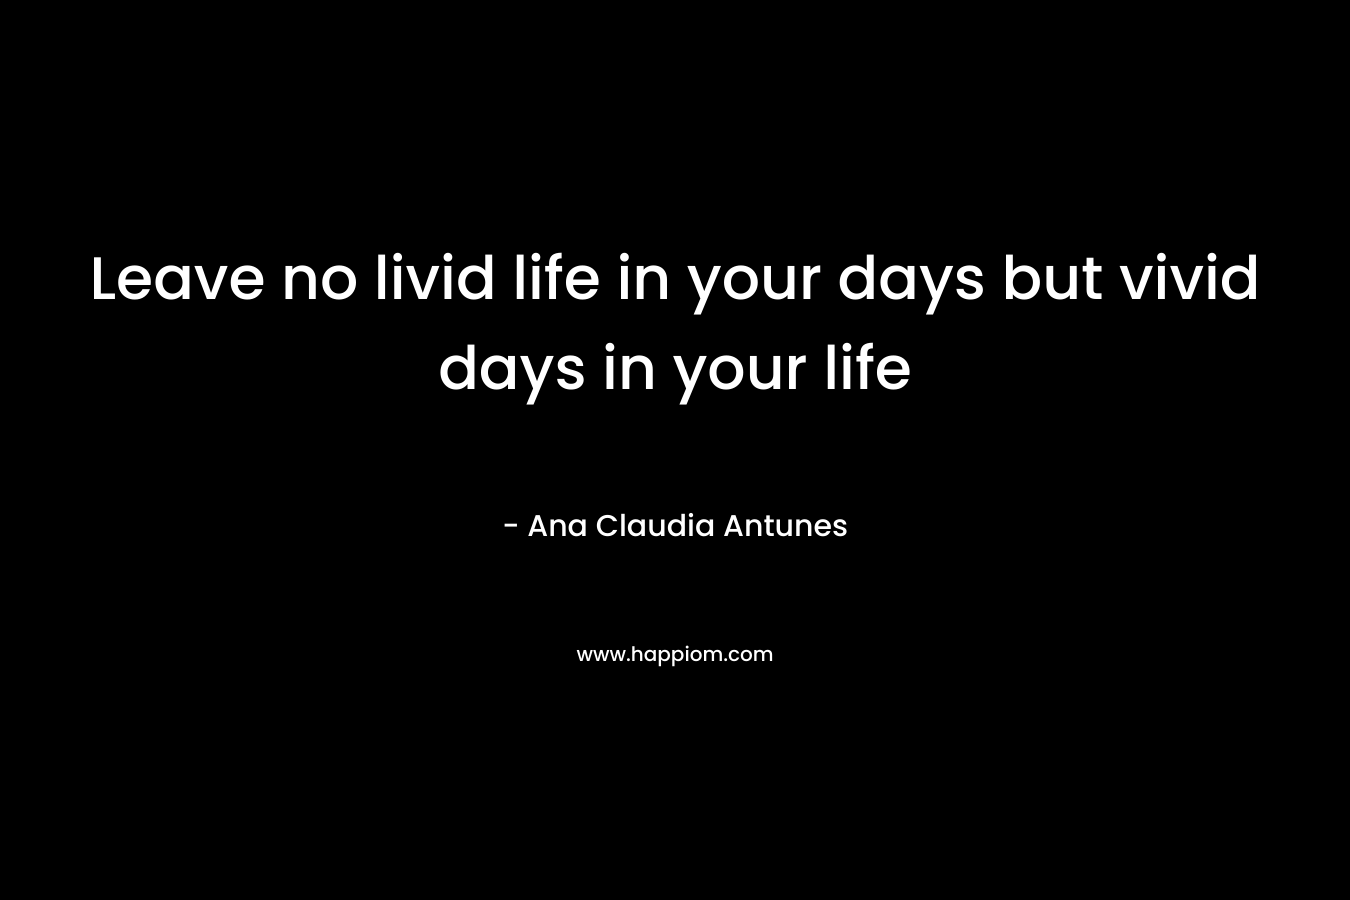 Leave no livid life in your days but vivid days in your life